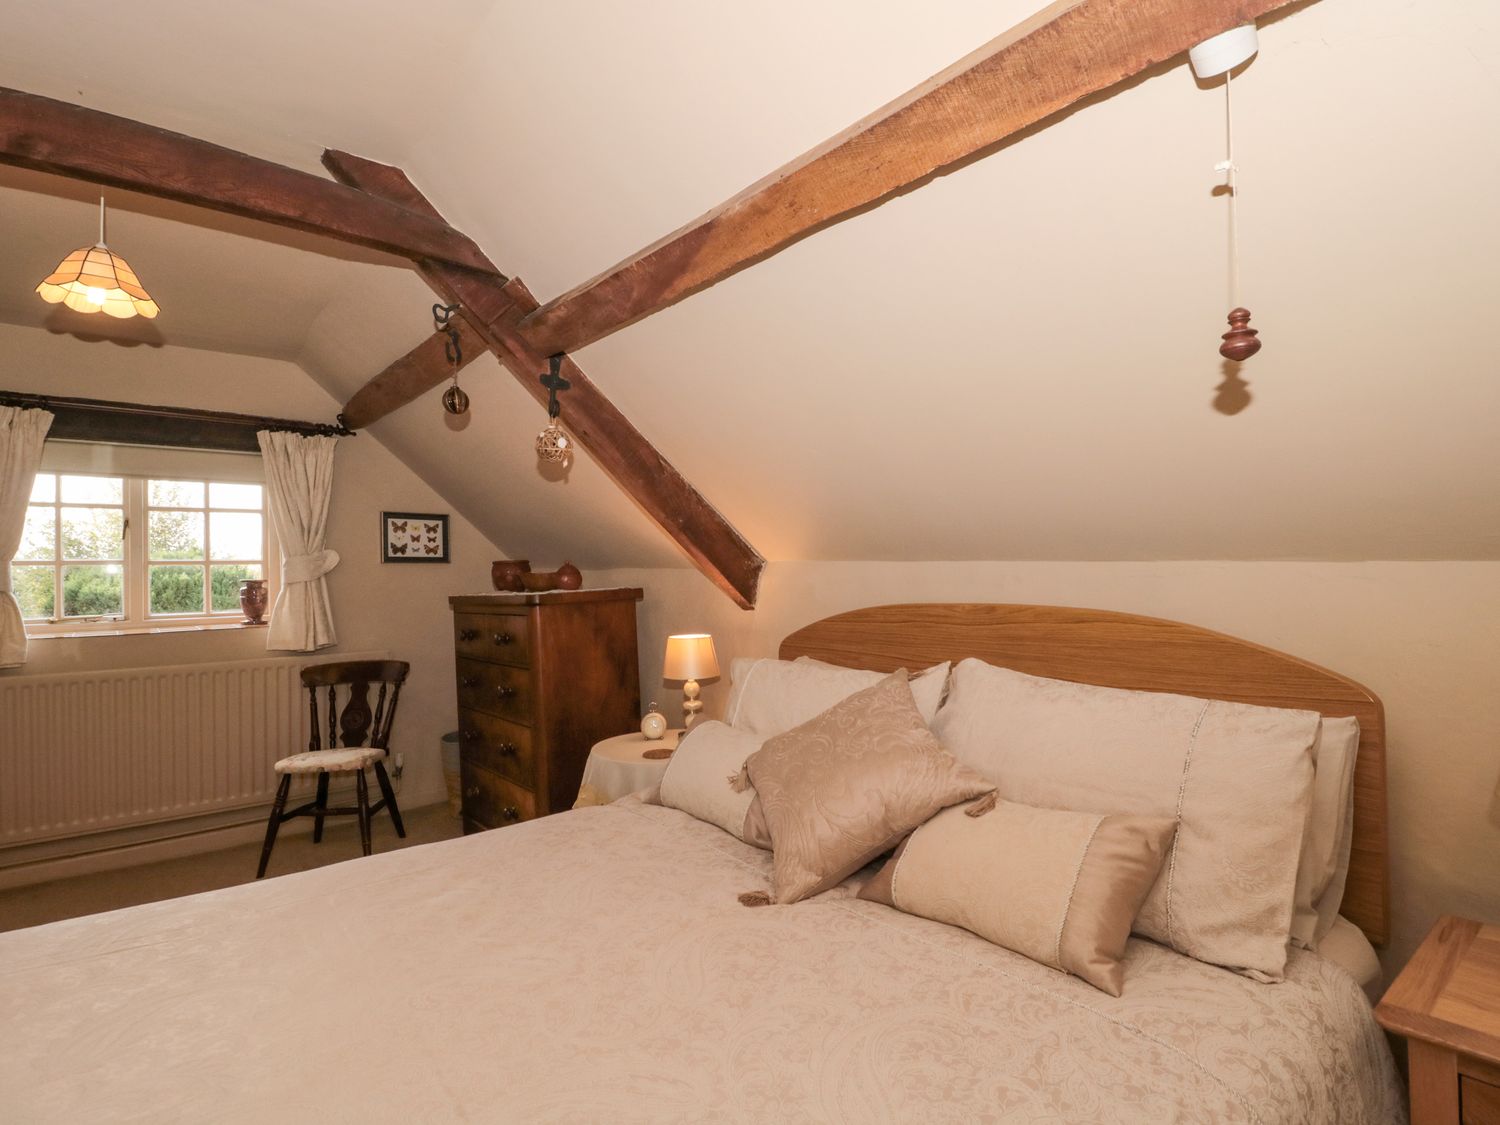 Elworth Farmhouse Cottage, near Portesham, Dorset. One-bedroom, thatched cottage with swimming pool.